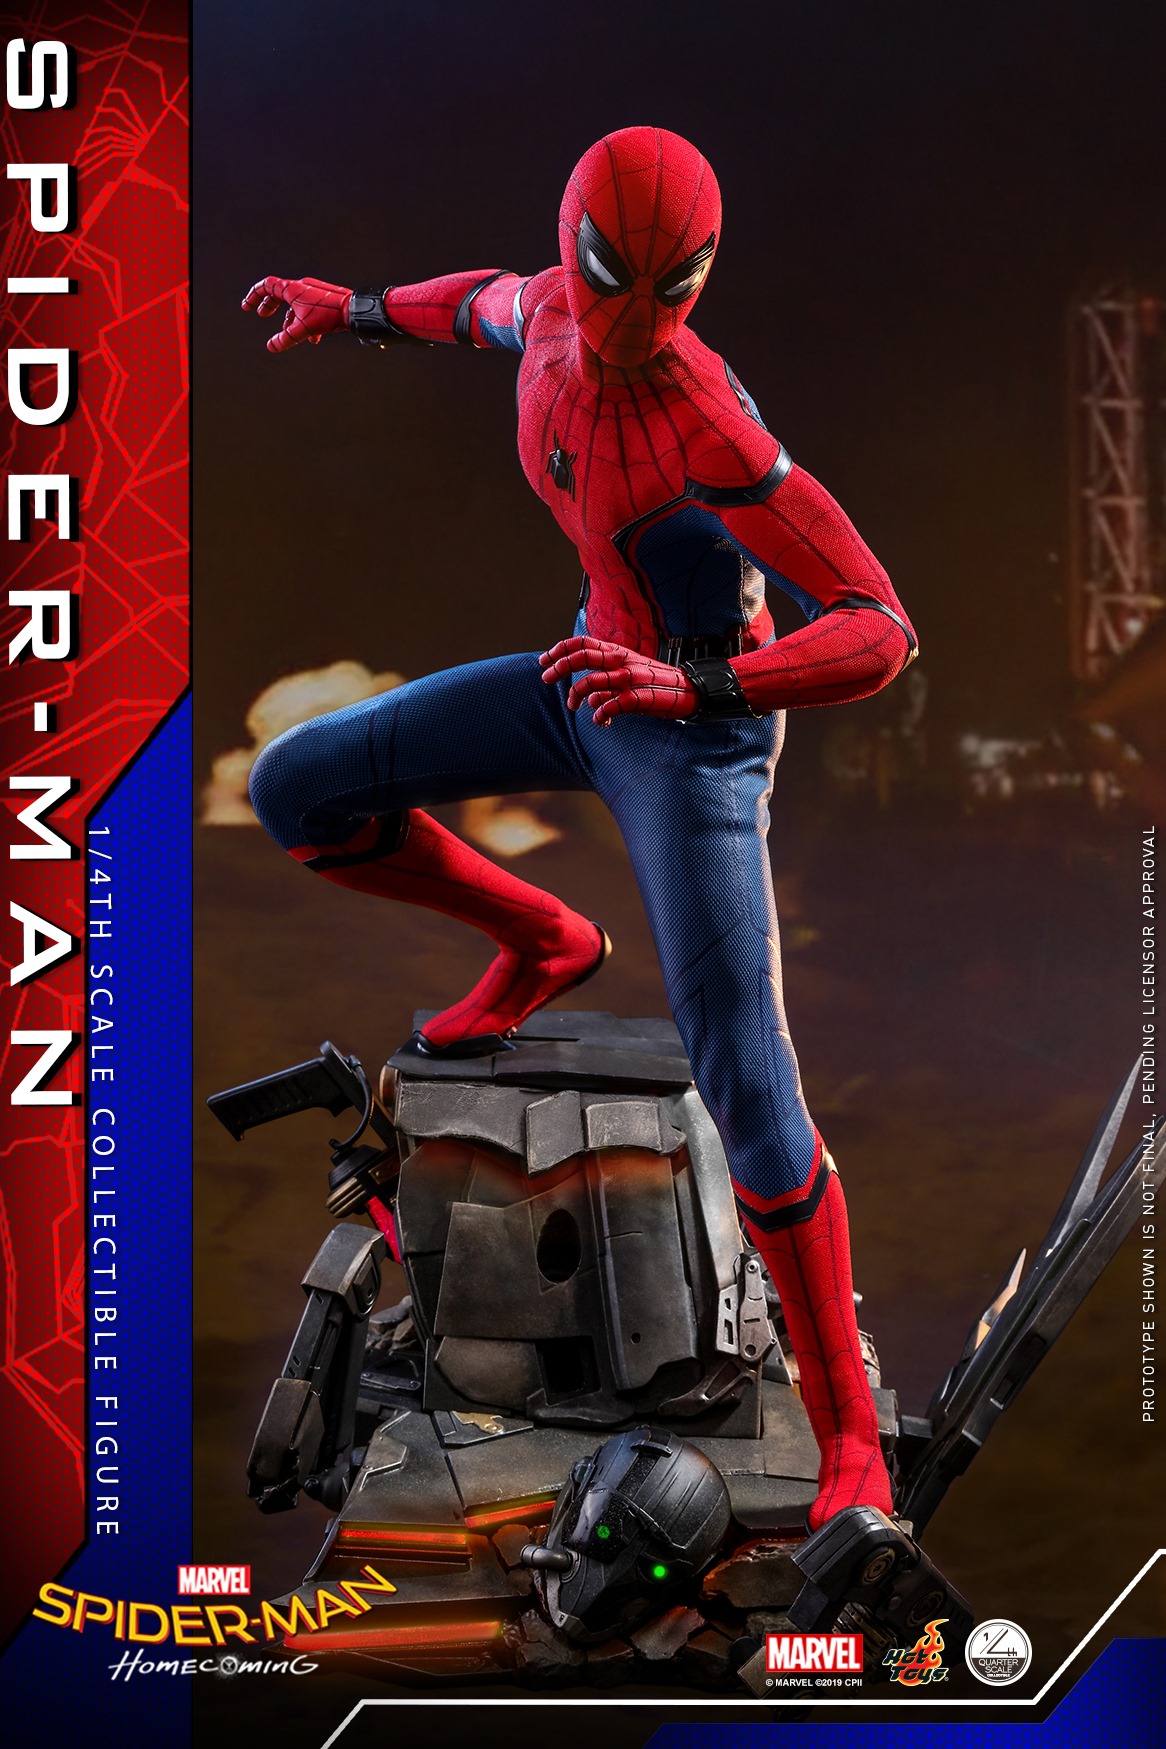 Hot Toys Quarter Scale SpiderMan Figure Up for Order